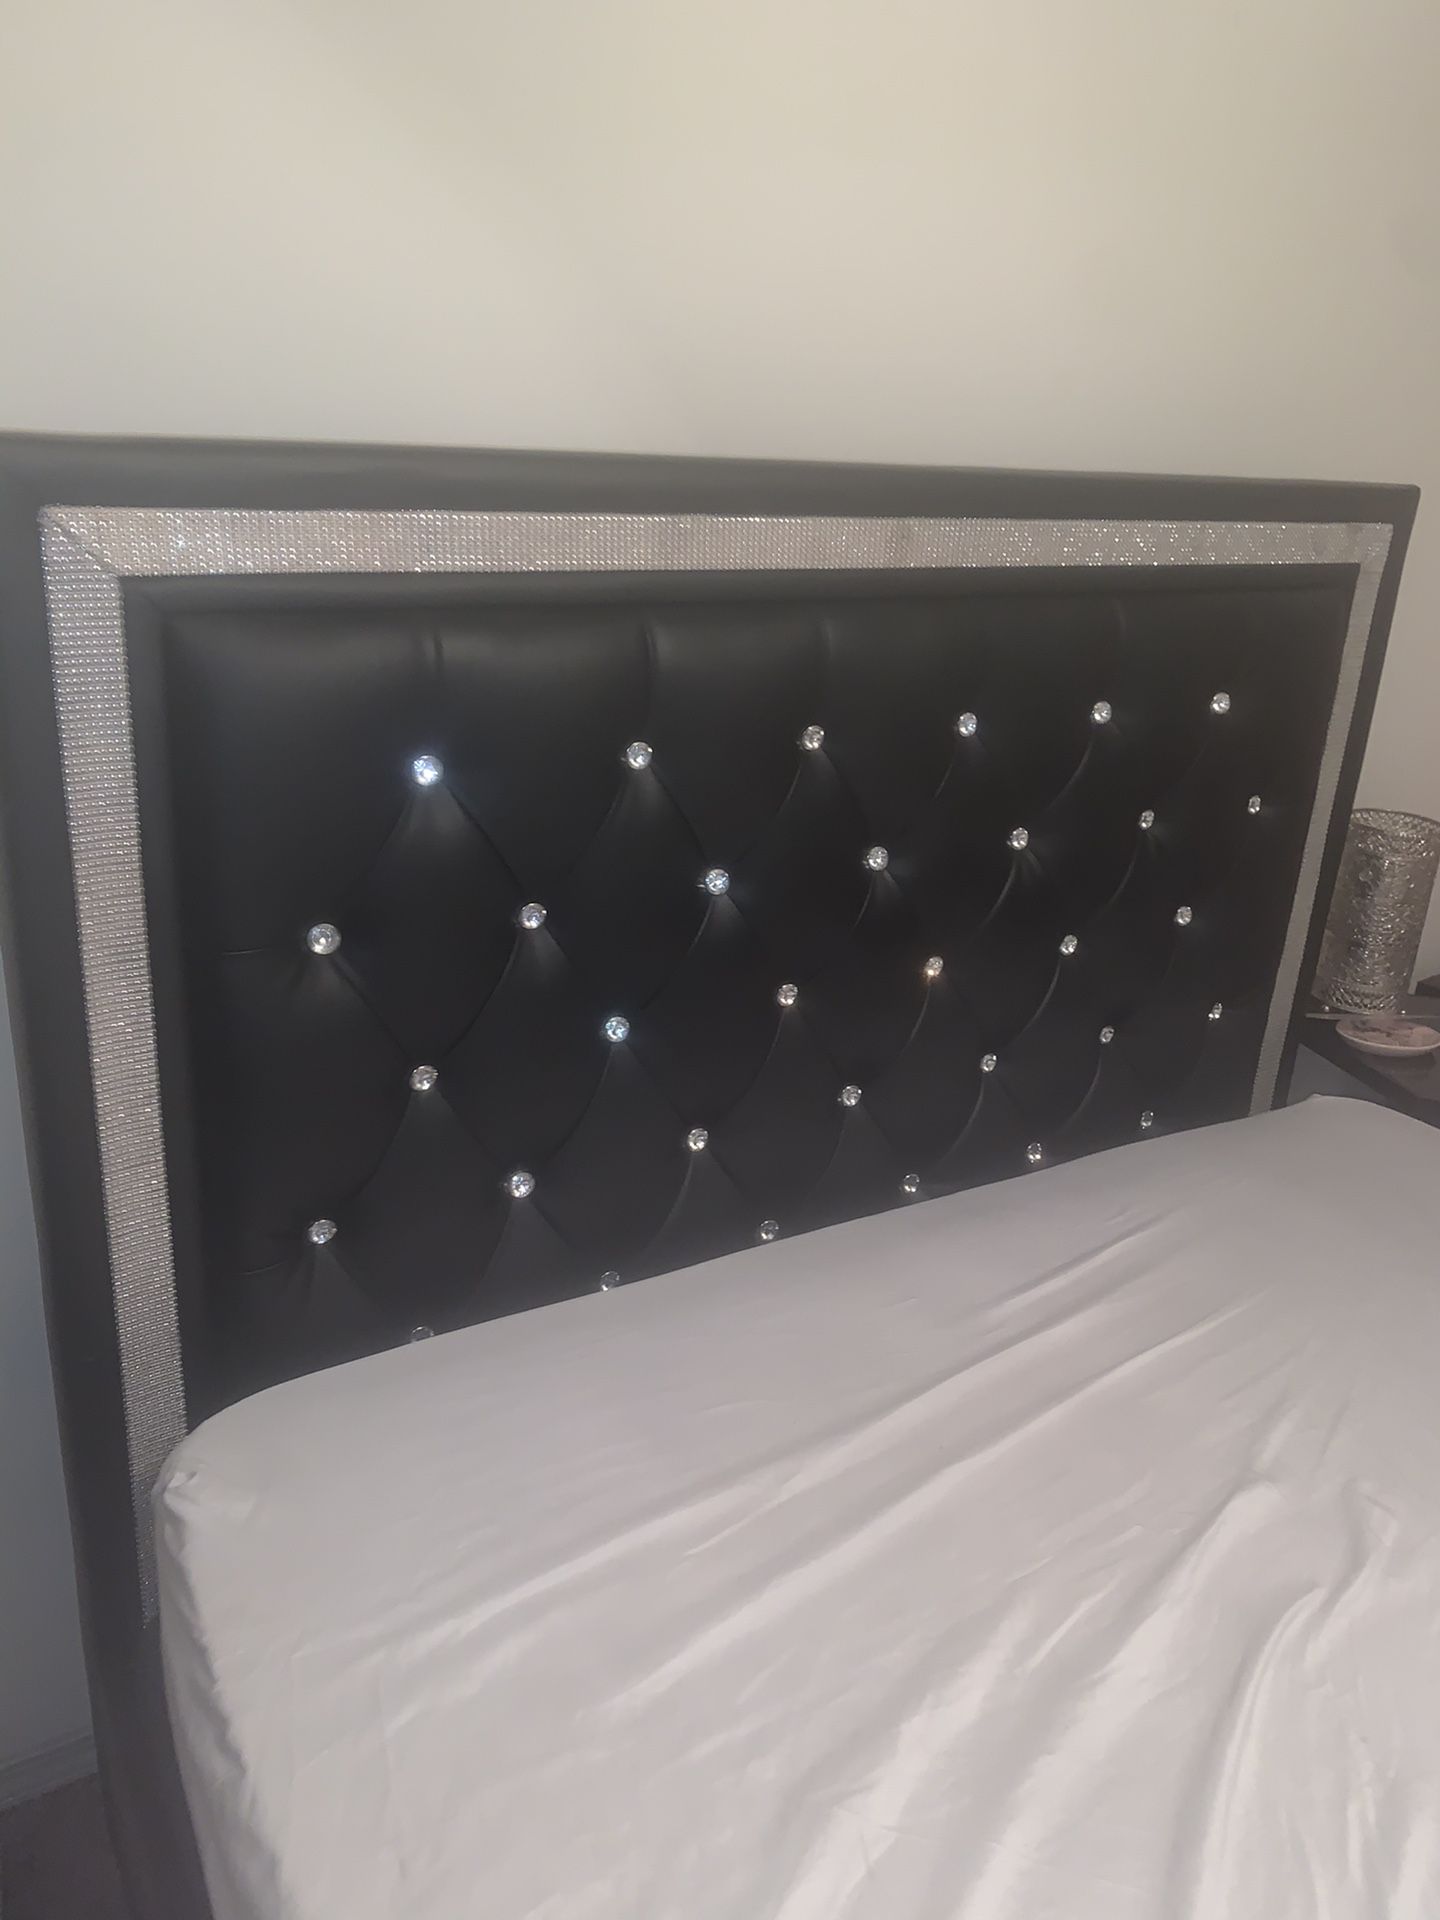 Queen Diamond Bed set 💎 Comes with Bed, Dresser w/Mirror attached and bedside dresser